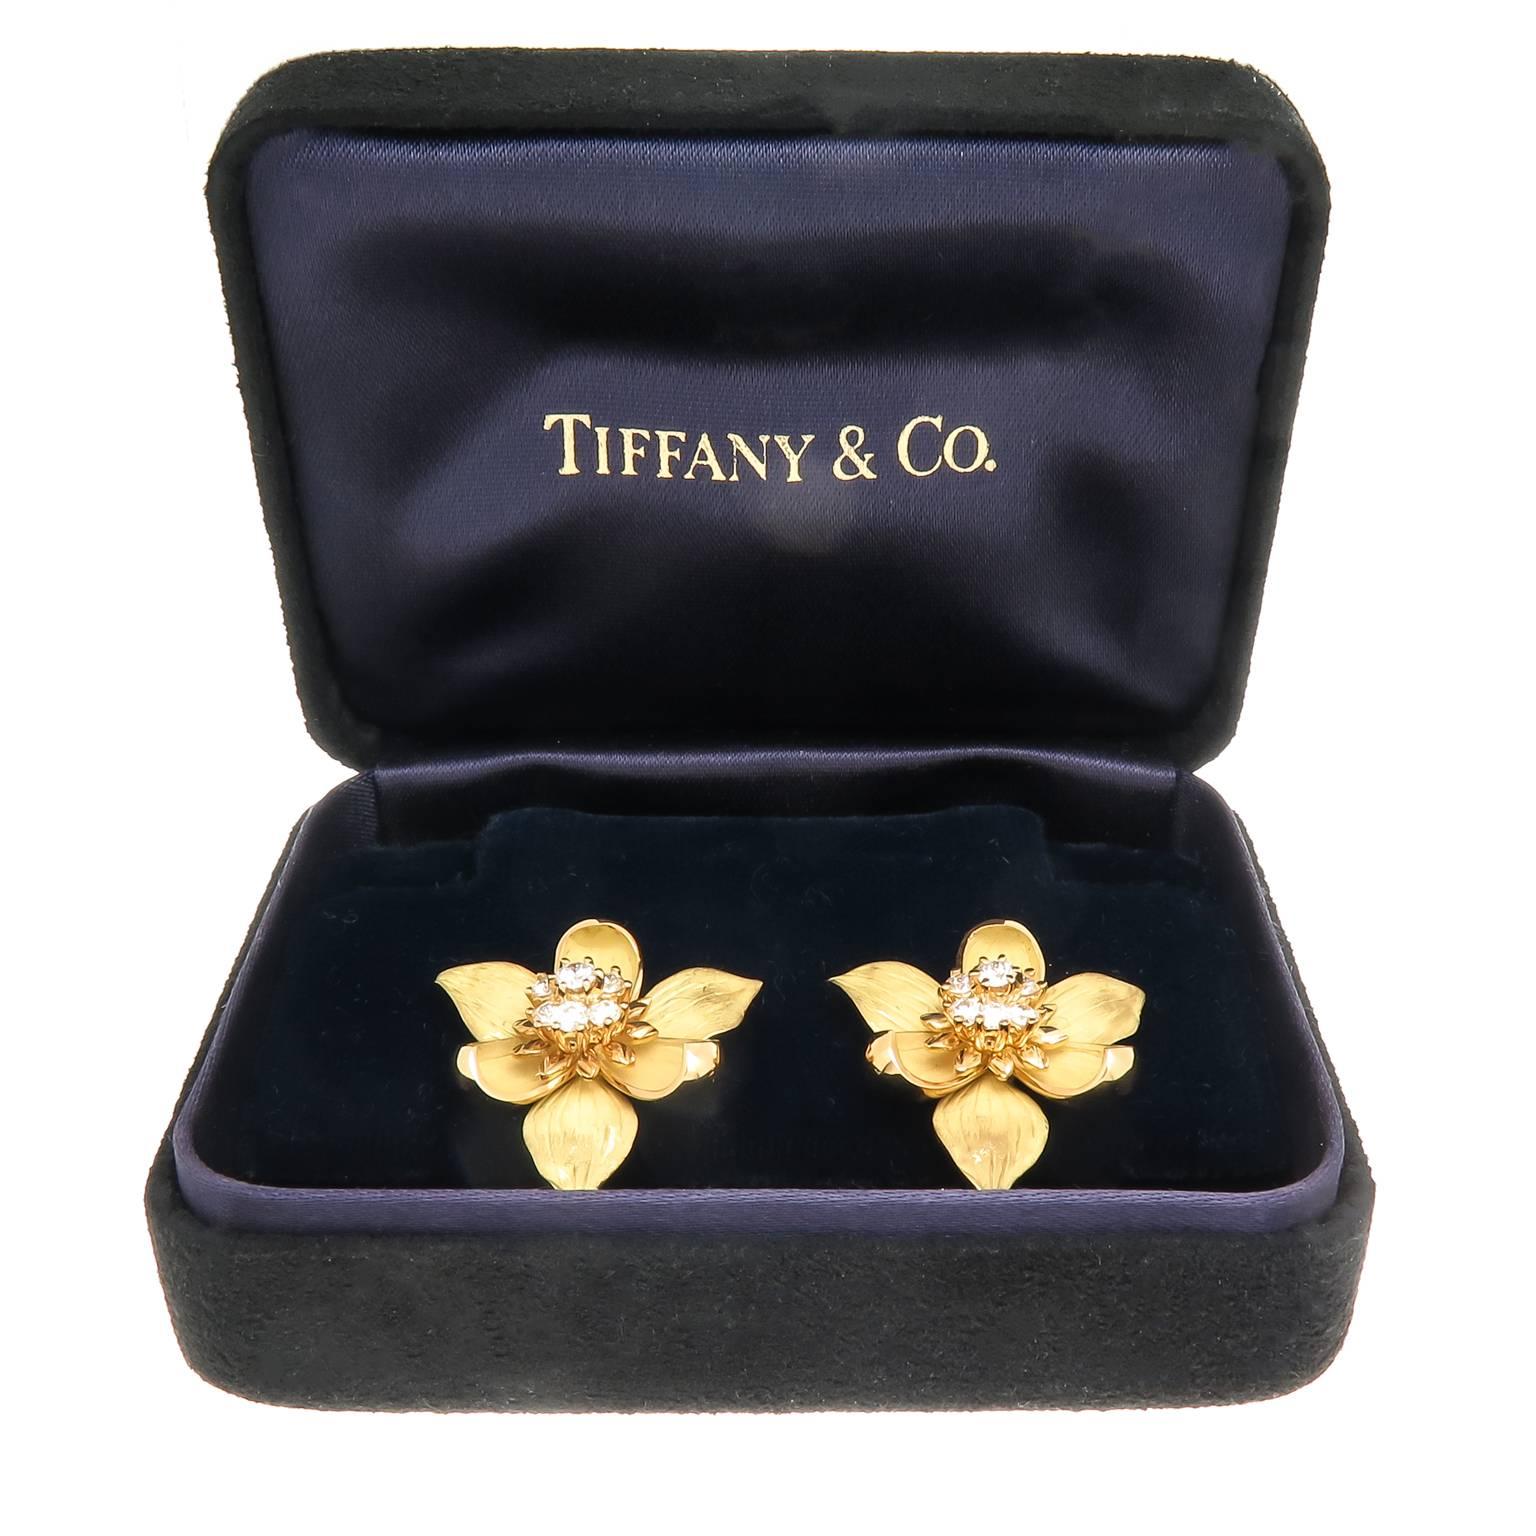 Circa 2014 Tiffany & Company Flower Earrings, 18K Yellow Gold measuring 1 inch in diameter, Textured Petals and centrally set with Round Brilliant cut Diamonds totaling .60 Carat.  Having clip backs to which a post can be easily added if desired.